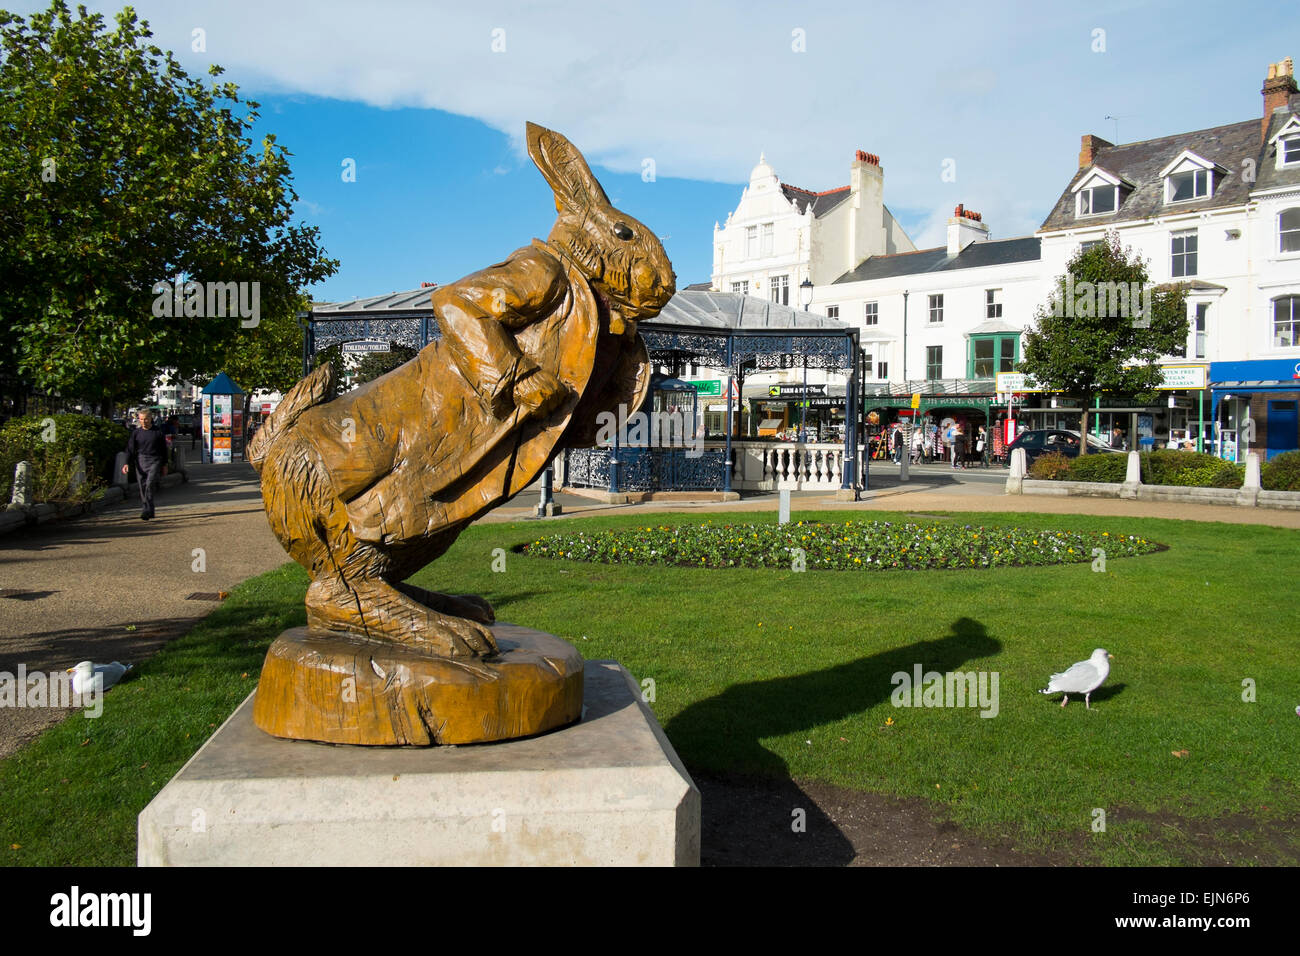 The White Rabbit wooden statue which celebrates the town's links to Alice In Wonderland author Lewis Carroll, Llandudno, Wales. Stock Photo